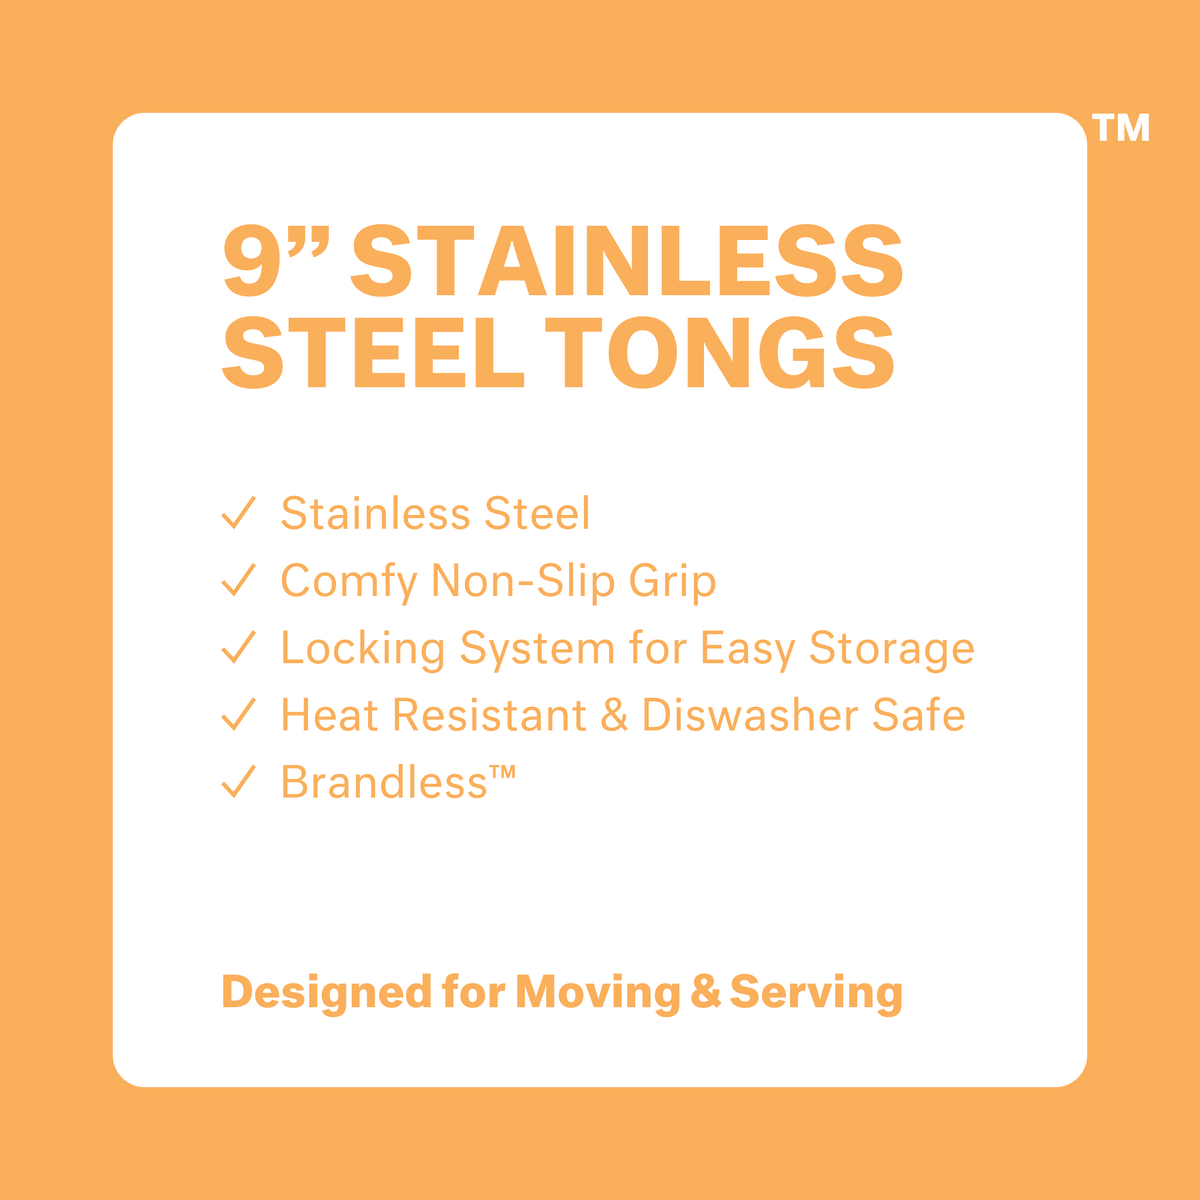 9 inch stainless steel tongs. Stainless steel. Comfy non-slip grip. Locking system for easy storage. Heat resistant &amp; dishwasher safe. Brandless. Designed for Moving &amp; Serving.